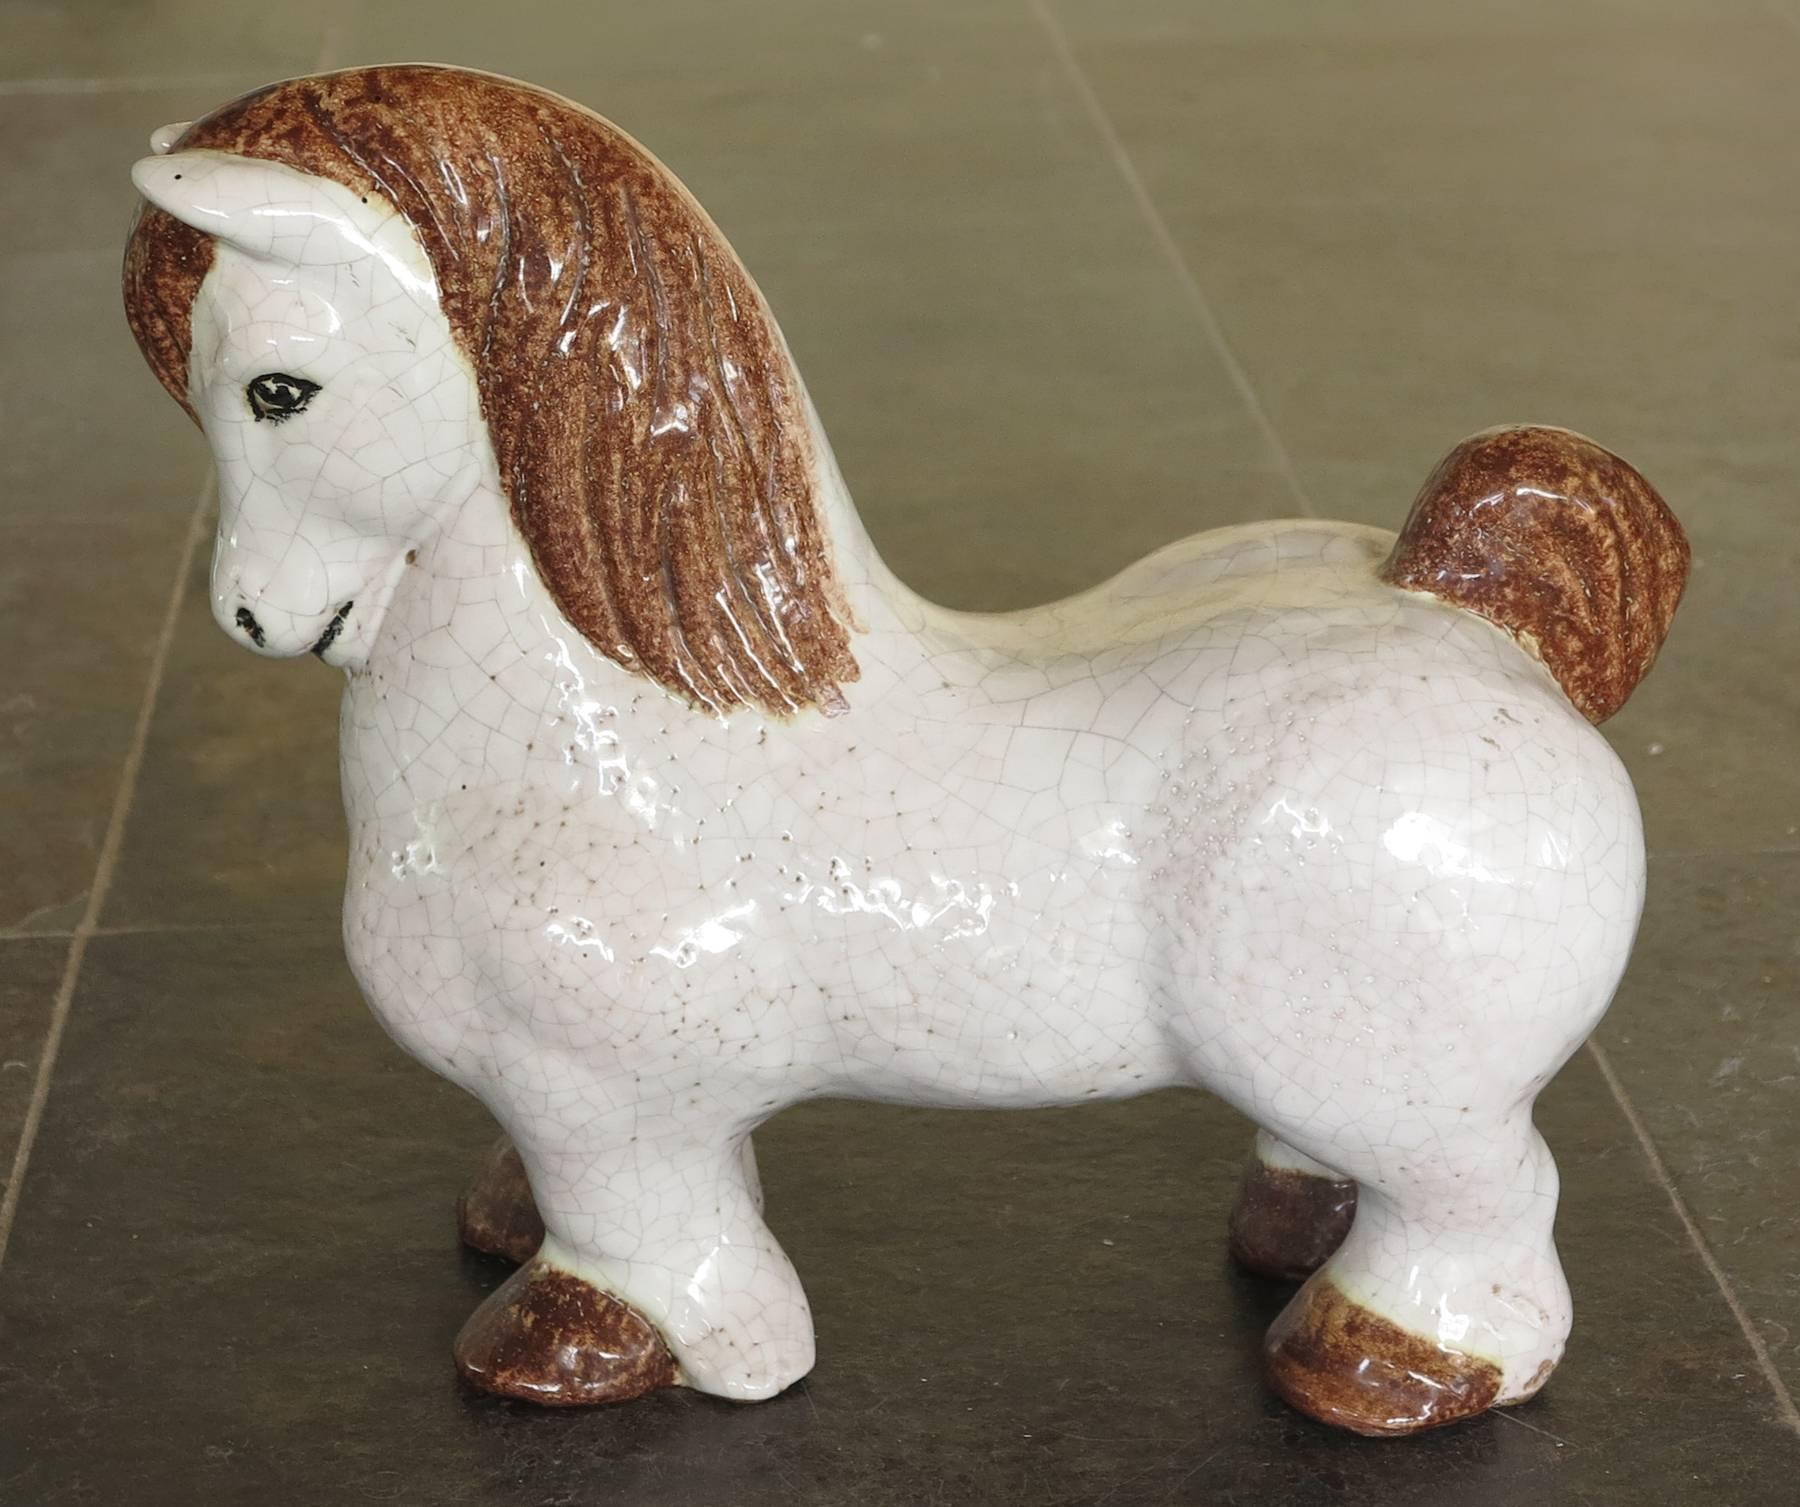 Italian Pottery Horse sculpture. White crackle glaze with brown glaze highlights.
In excellent condition.